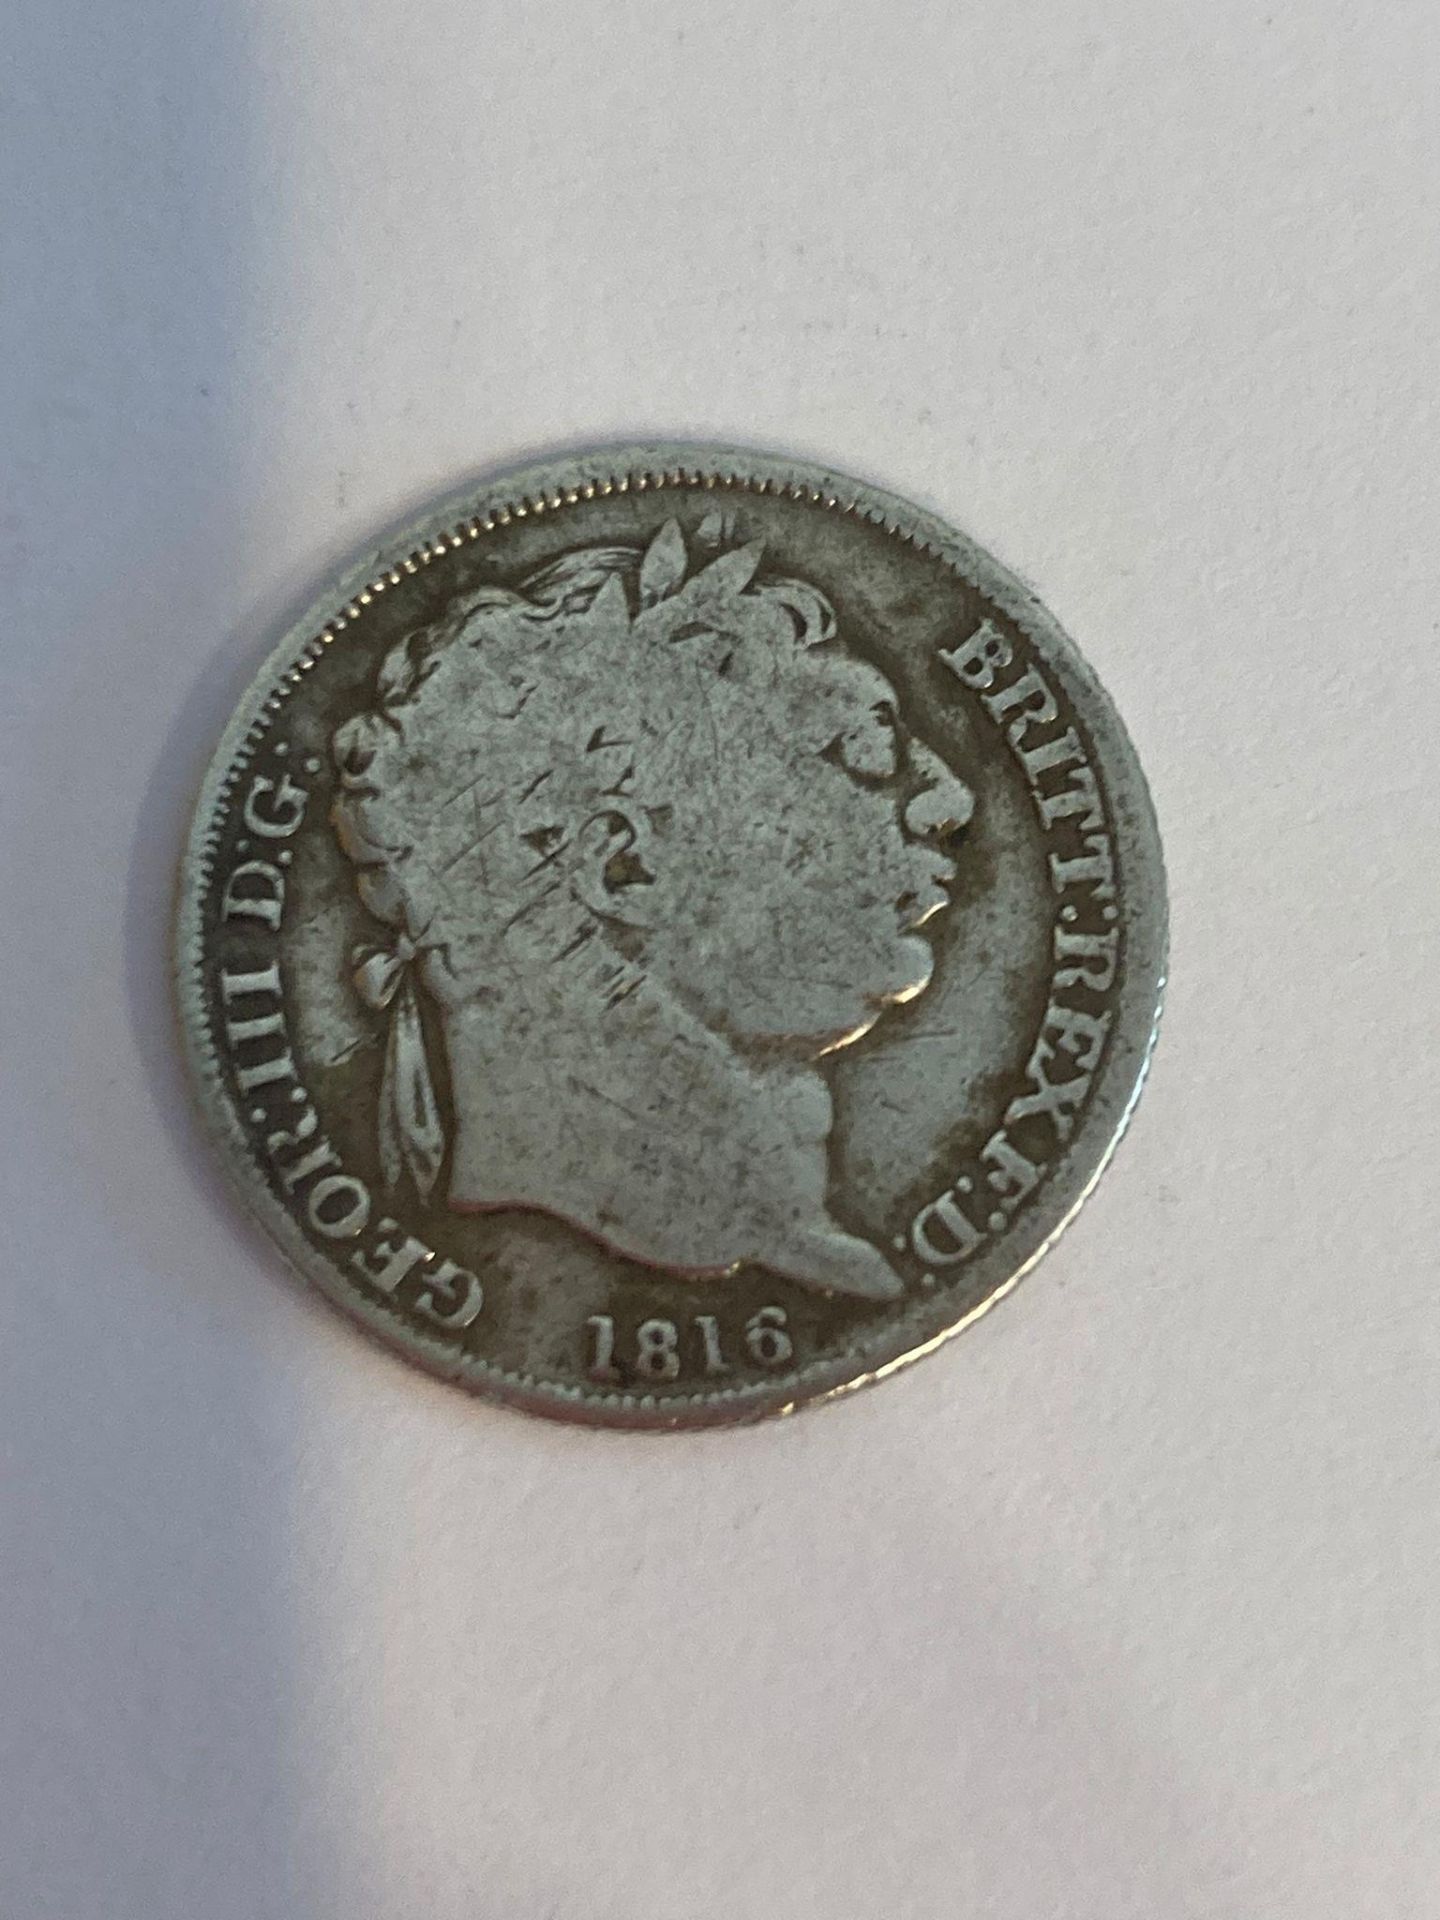 George III SILVER SIXPENCE 1816 in very/extra fine condition. Excellent definition could use a